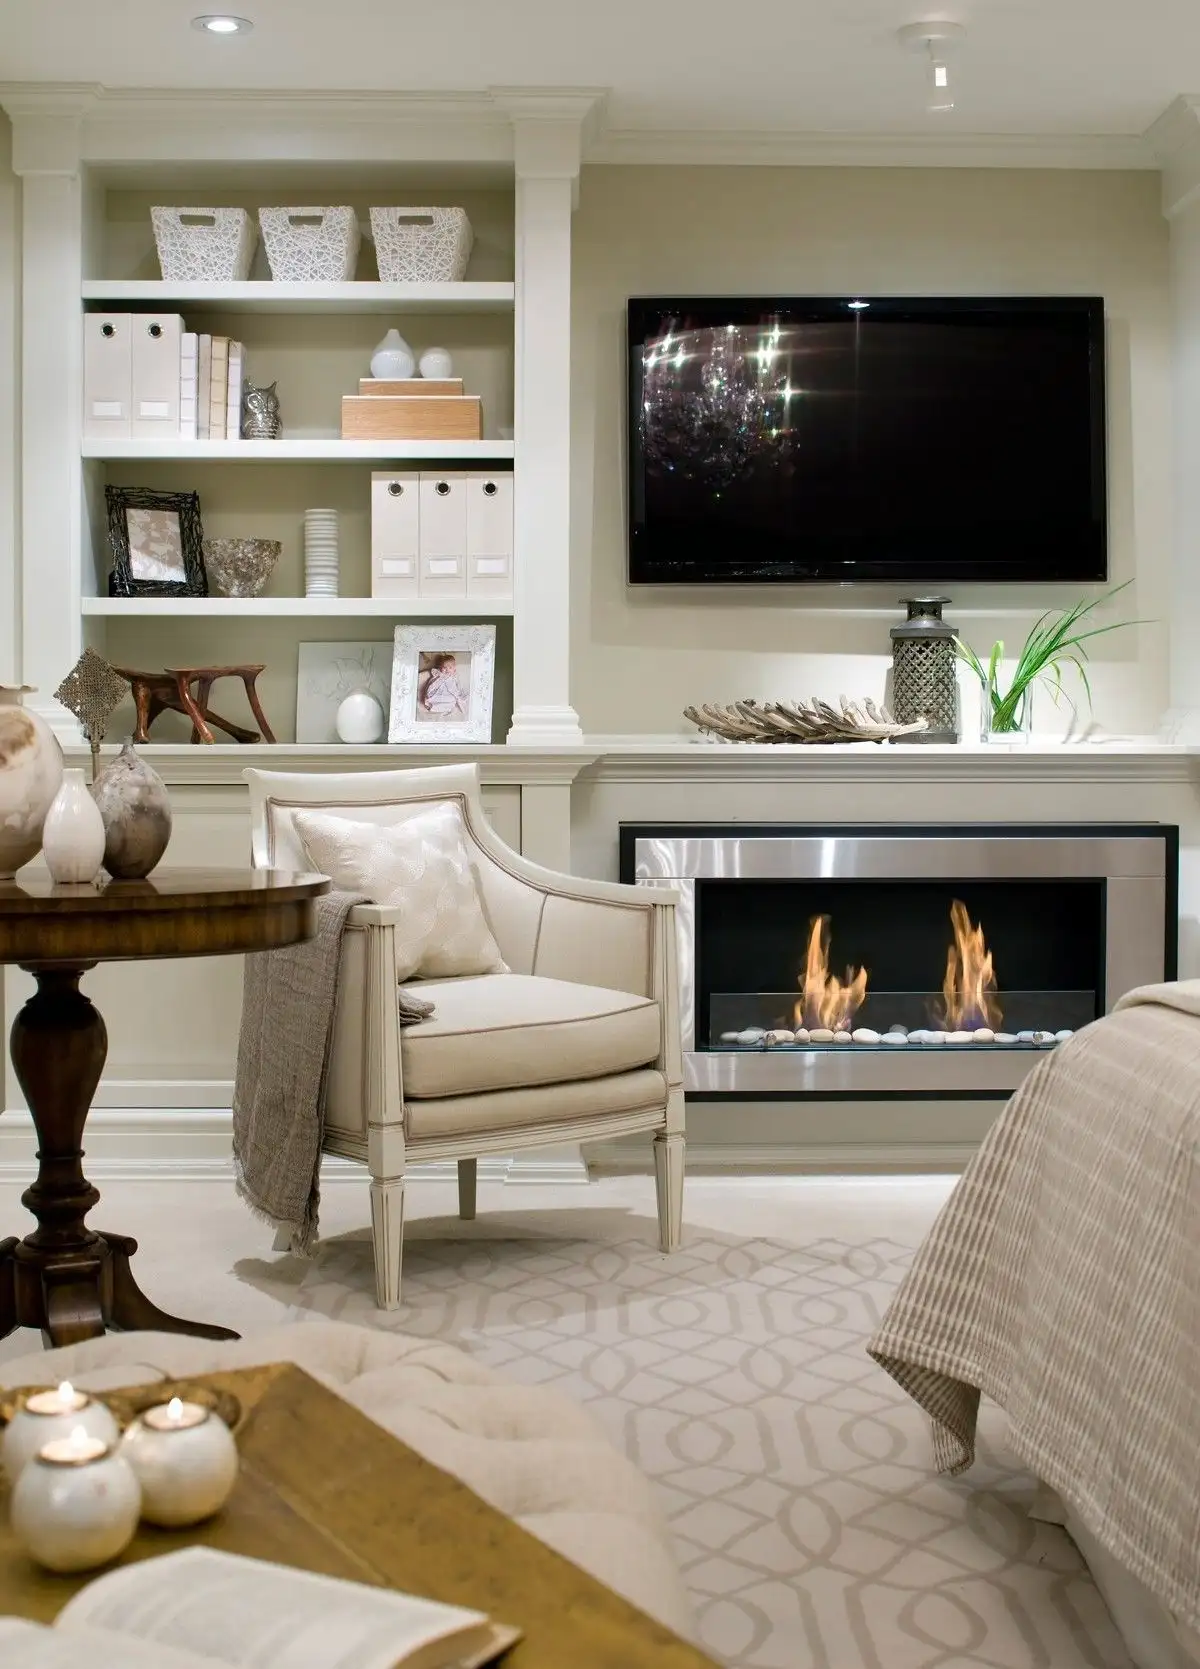 Cozy Up Your Master Bedroom With a Fireplace